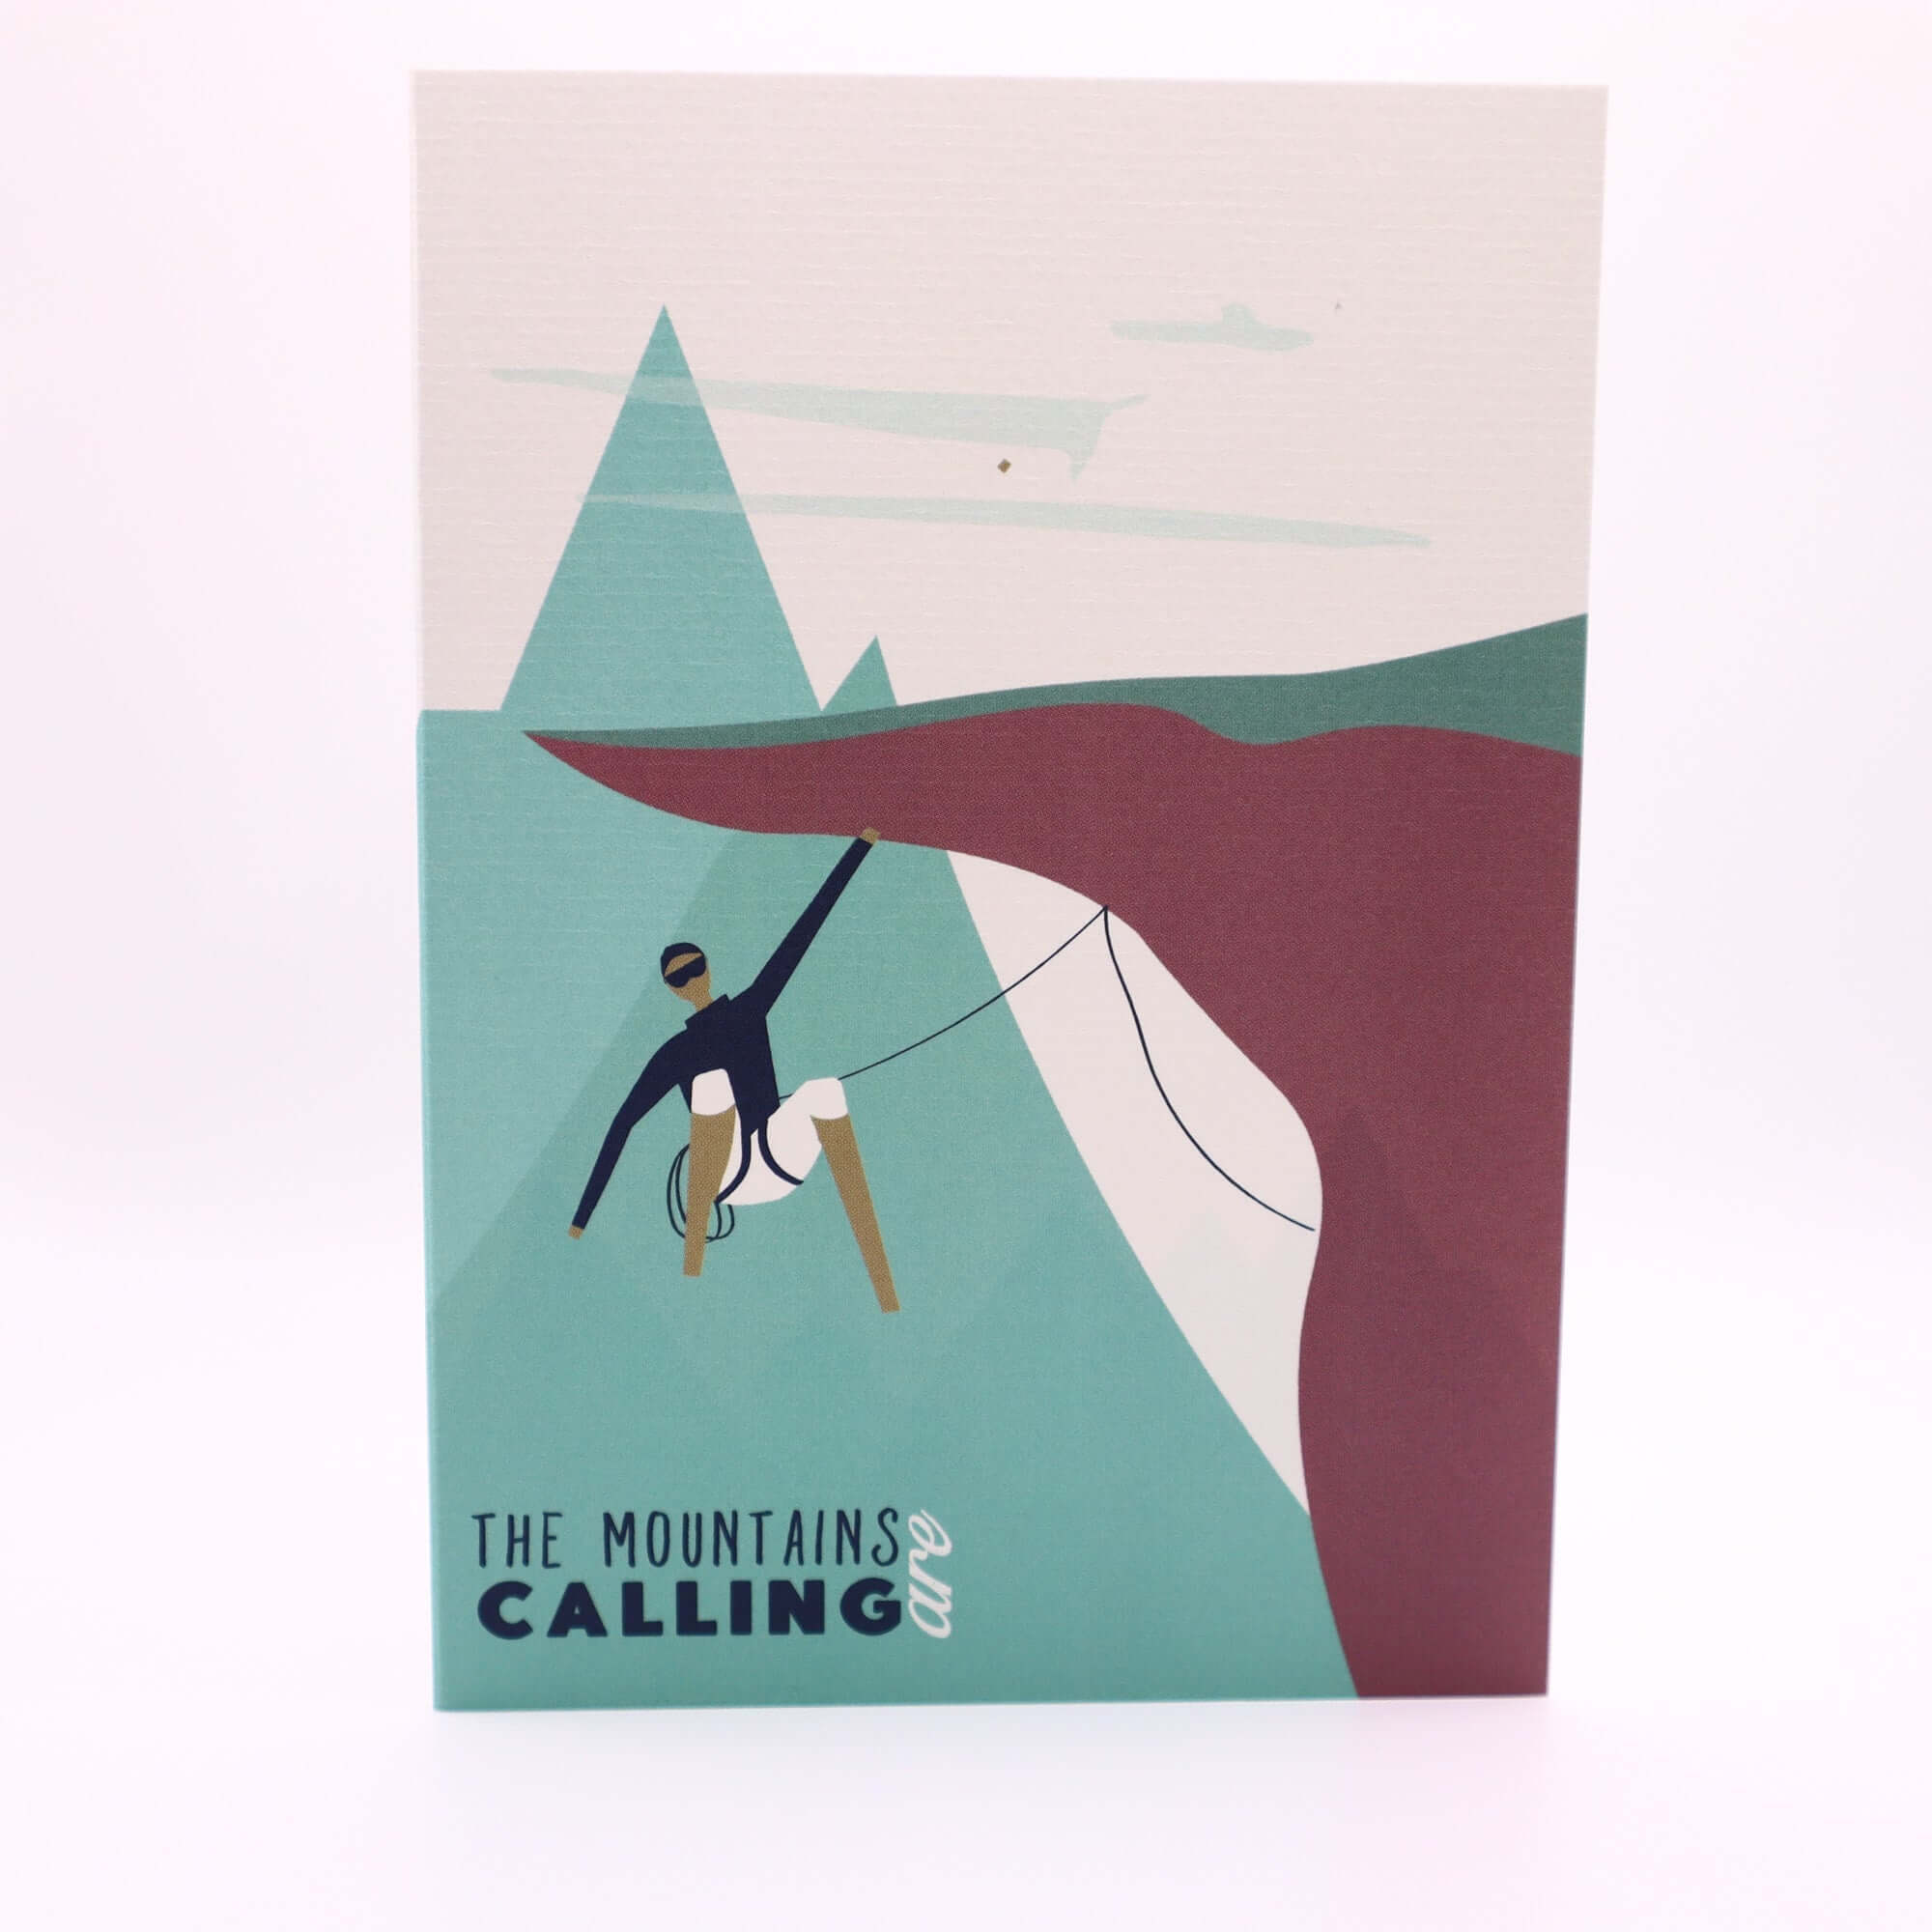 The Mountains are Calling "Rock Climbing" Greetings Card Greetings Card Mustard and Gray Ltd Shropshire UK